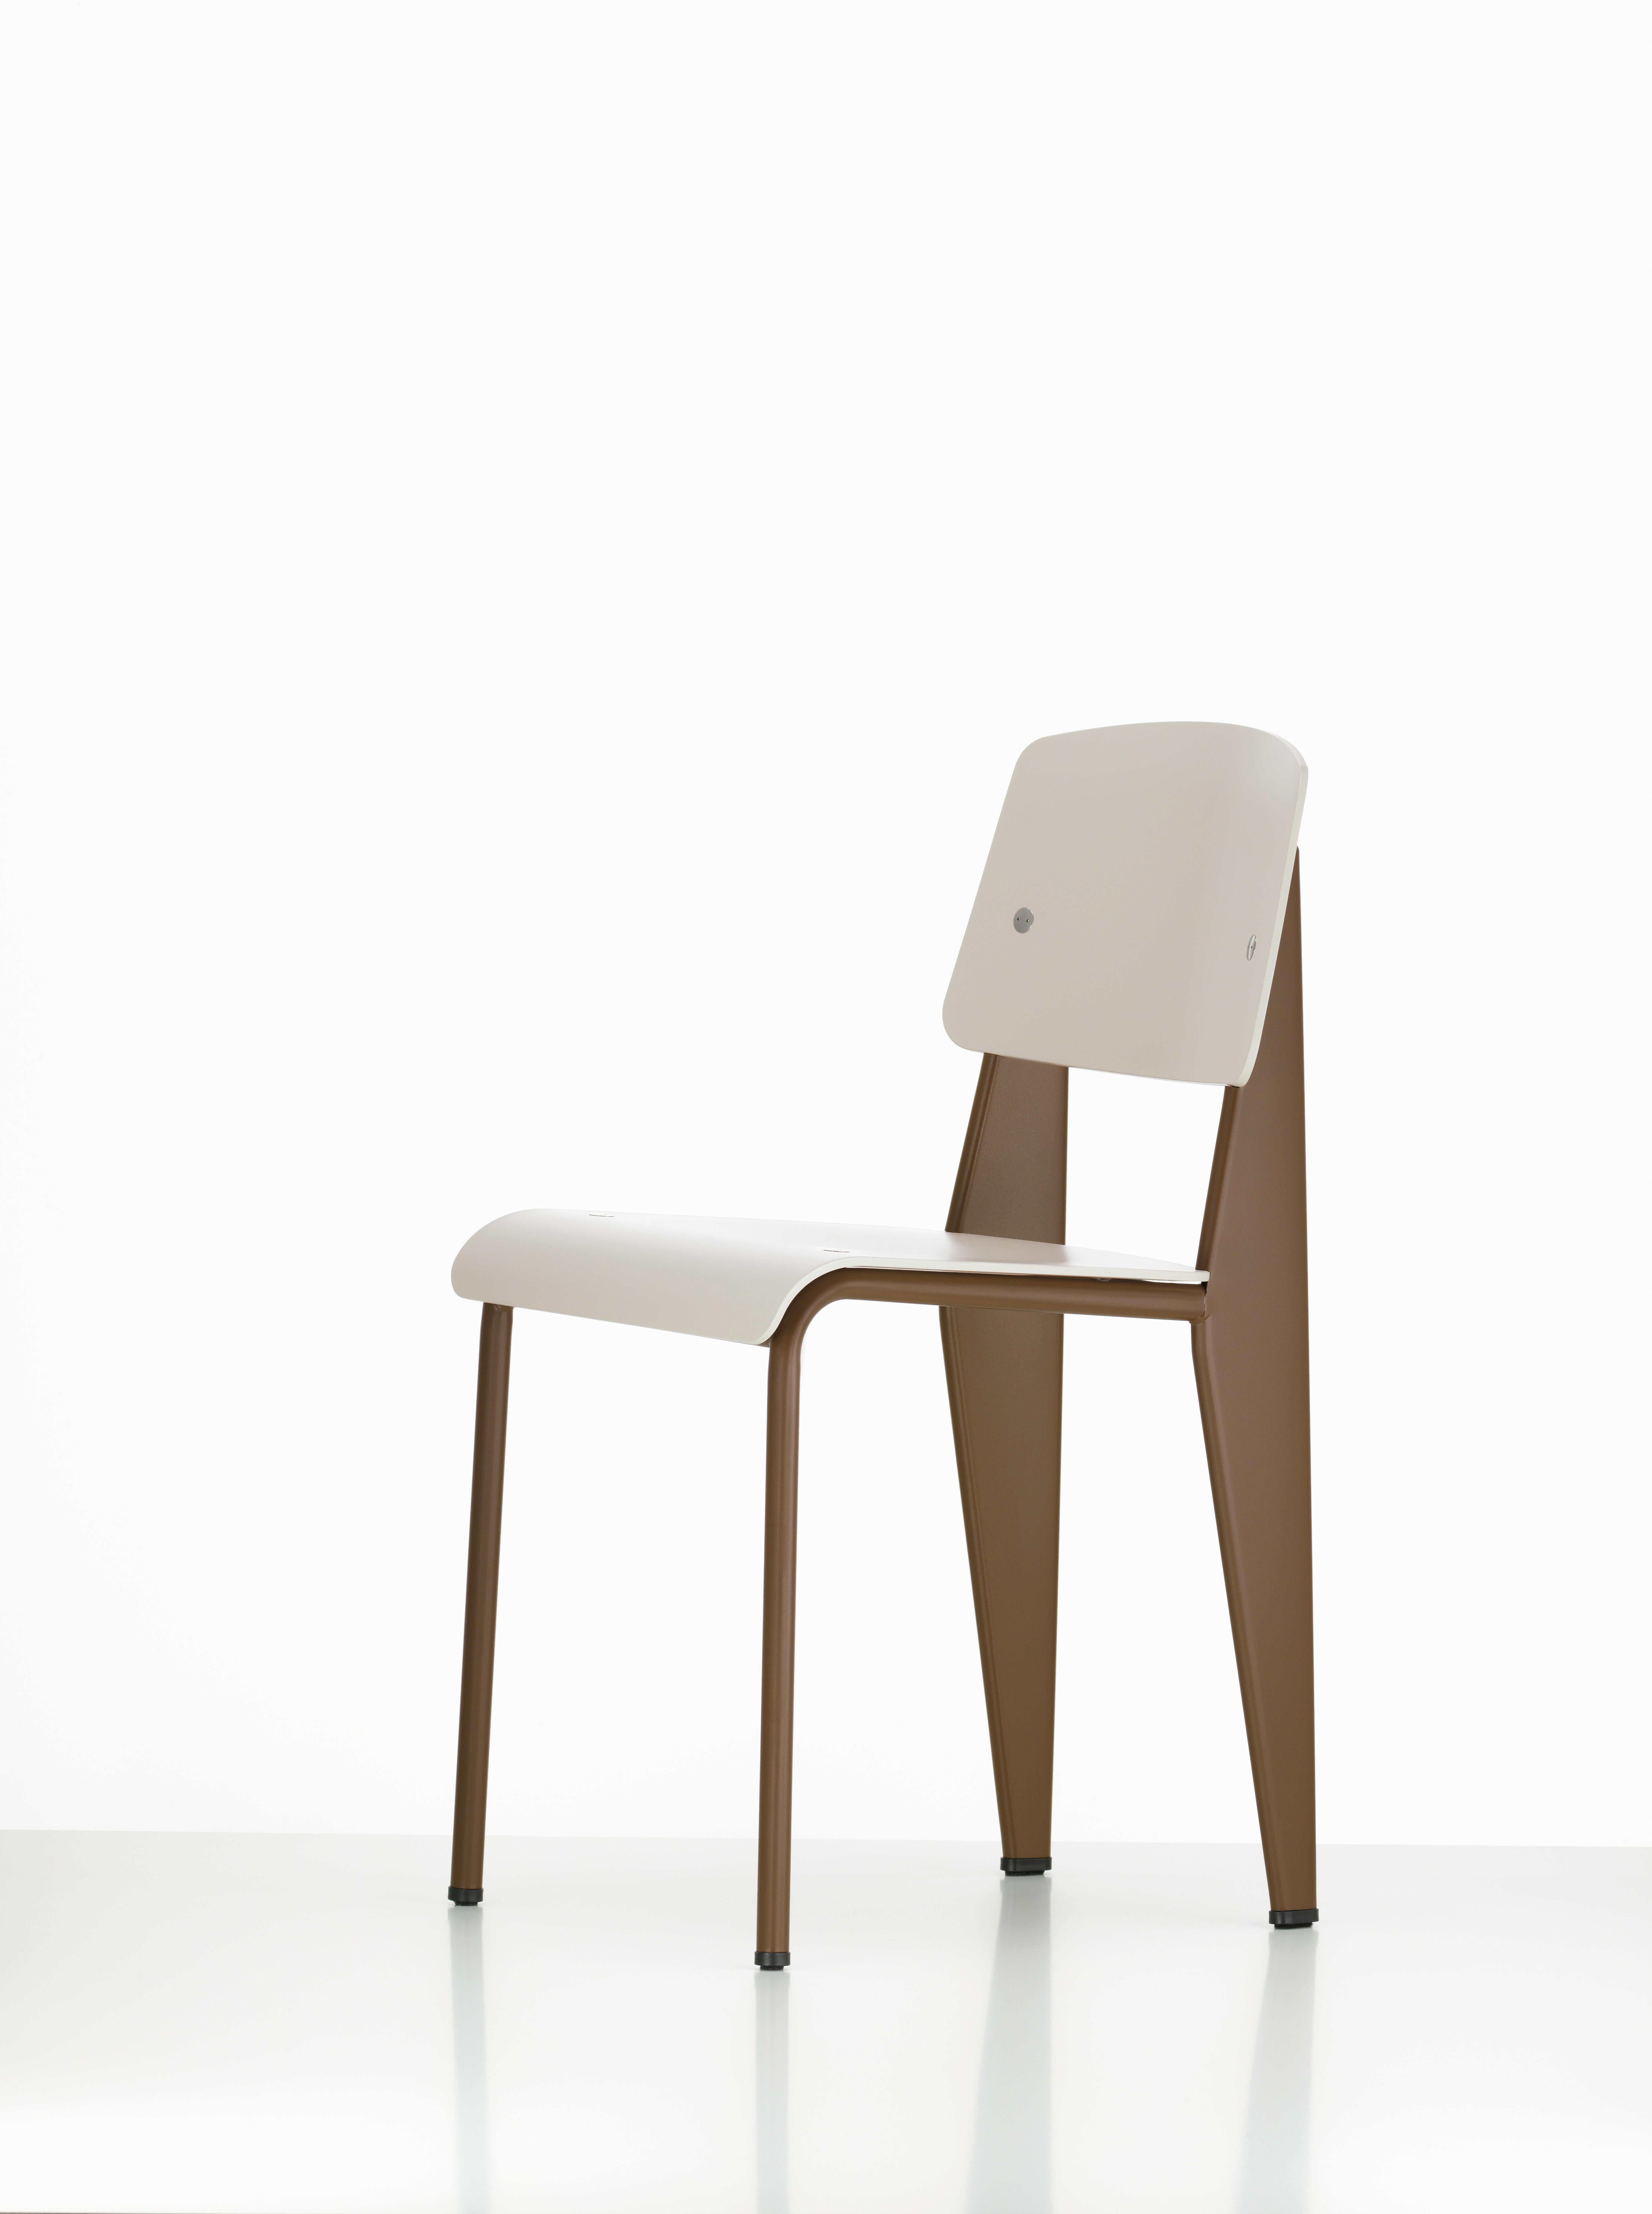 Jean Prouvé Standard Chair SP in Olive and Ecru White for Vitra 10